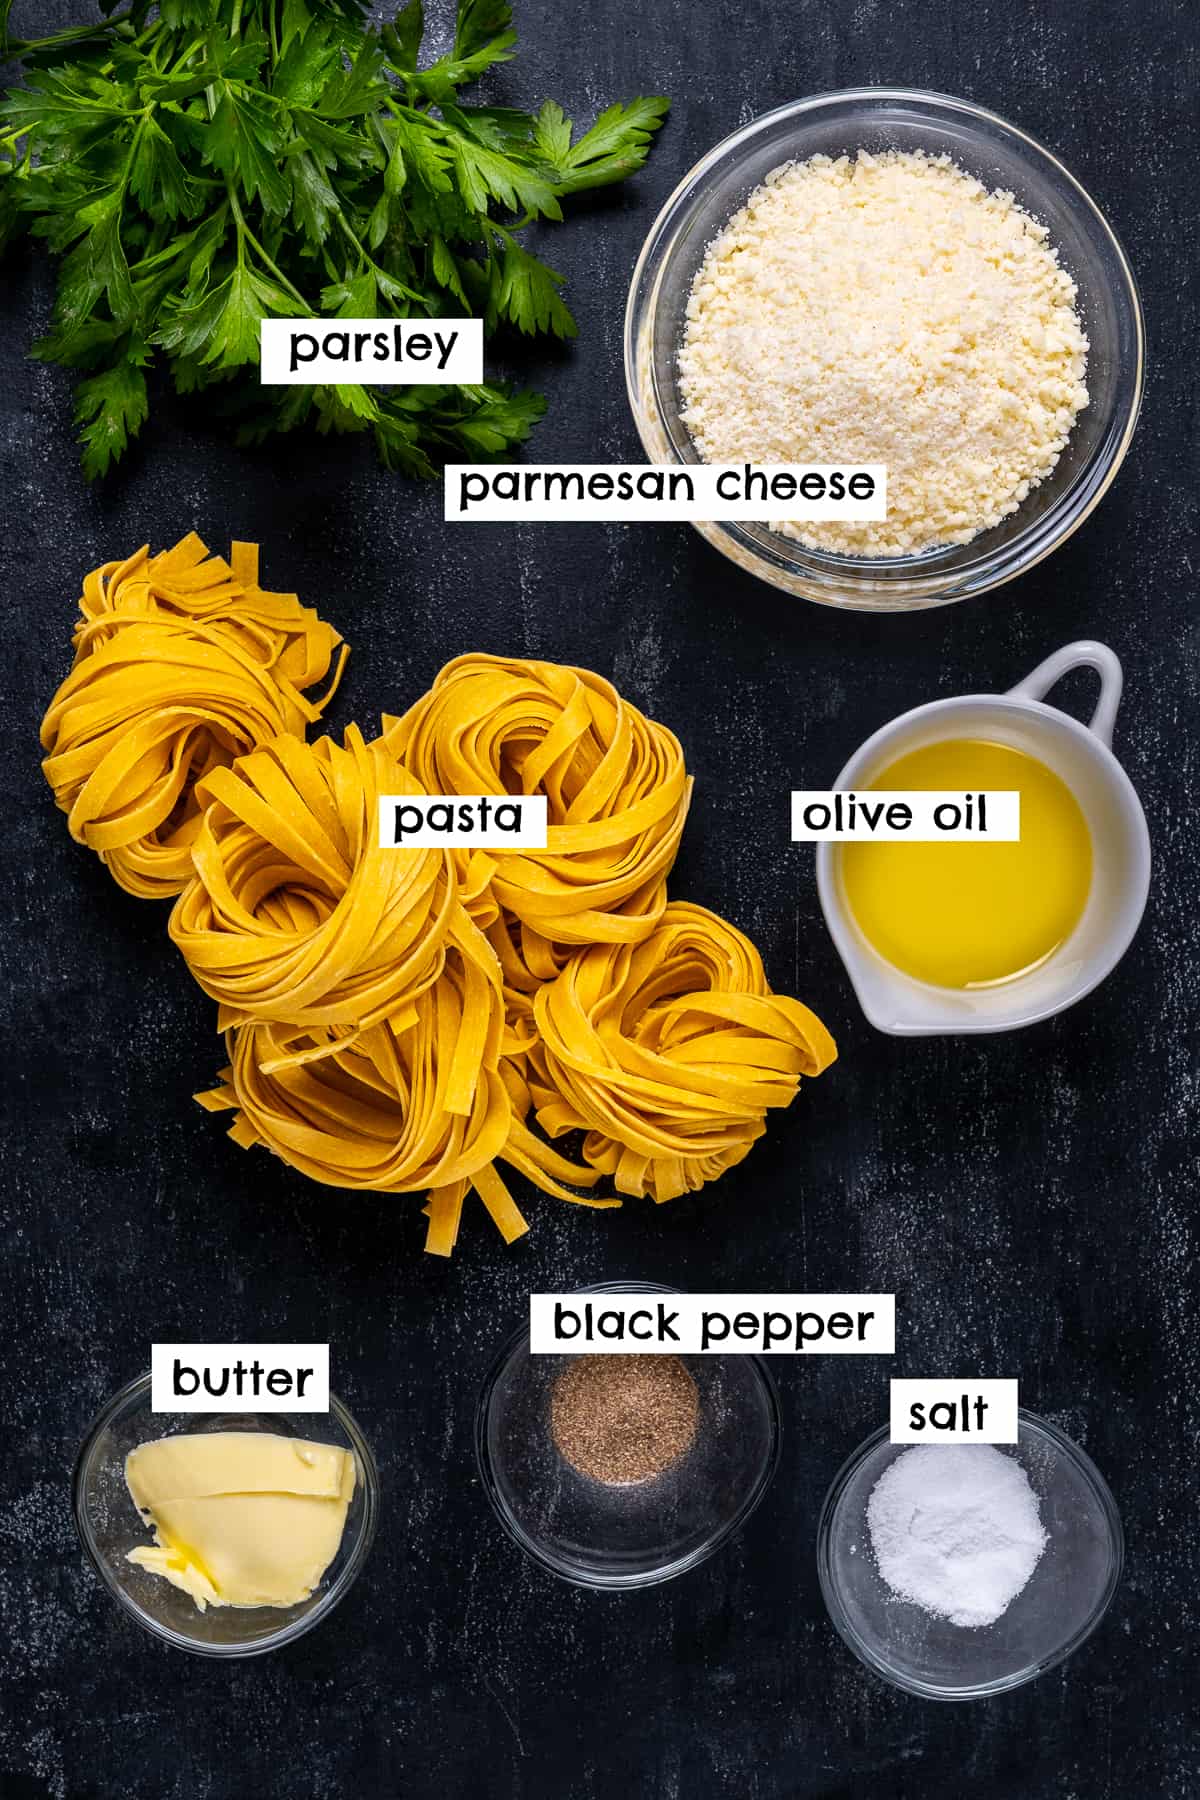 Dry fettuccine, butter, parmesan cheese, oil, parsley, salt and pepper photographed on a black background.